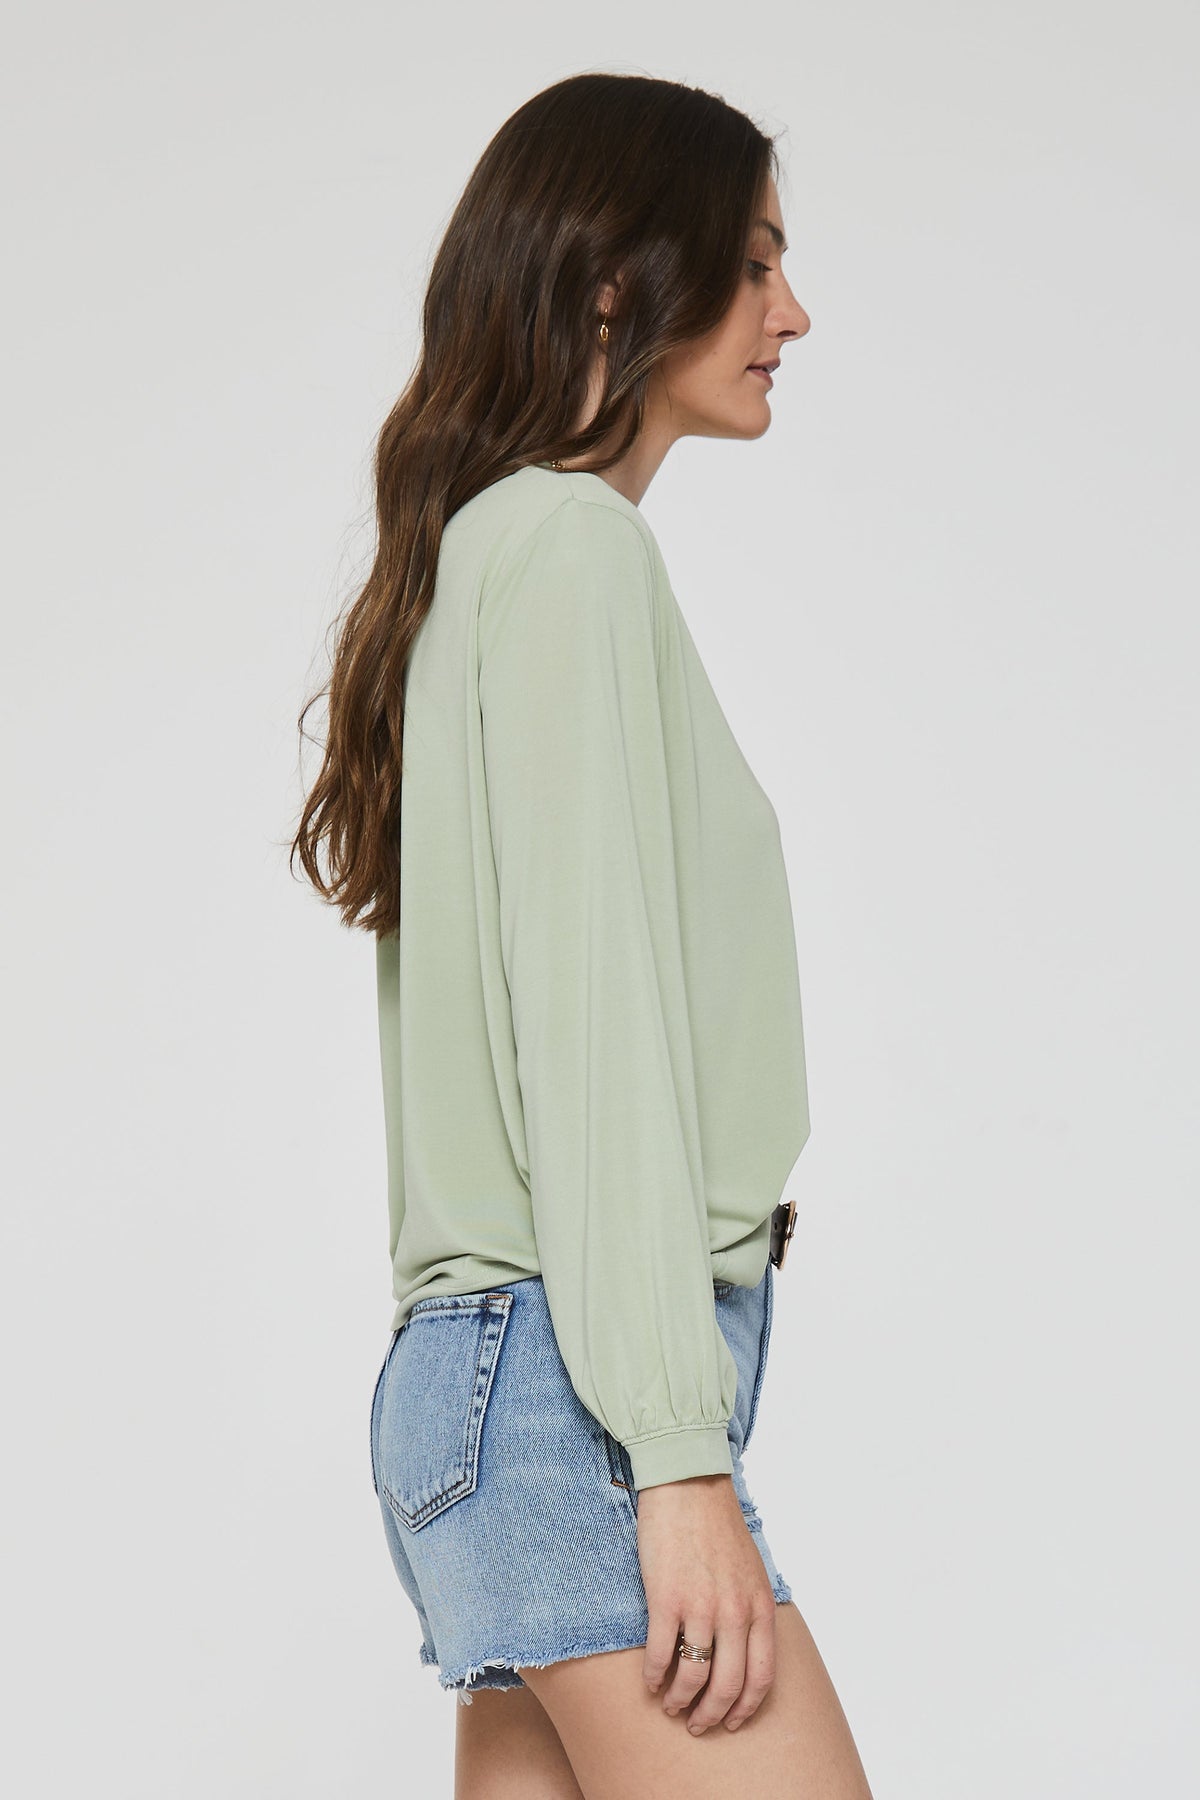 matilda-basic-long-sleeve-top-pistachio-side-image-another-love-clothing